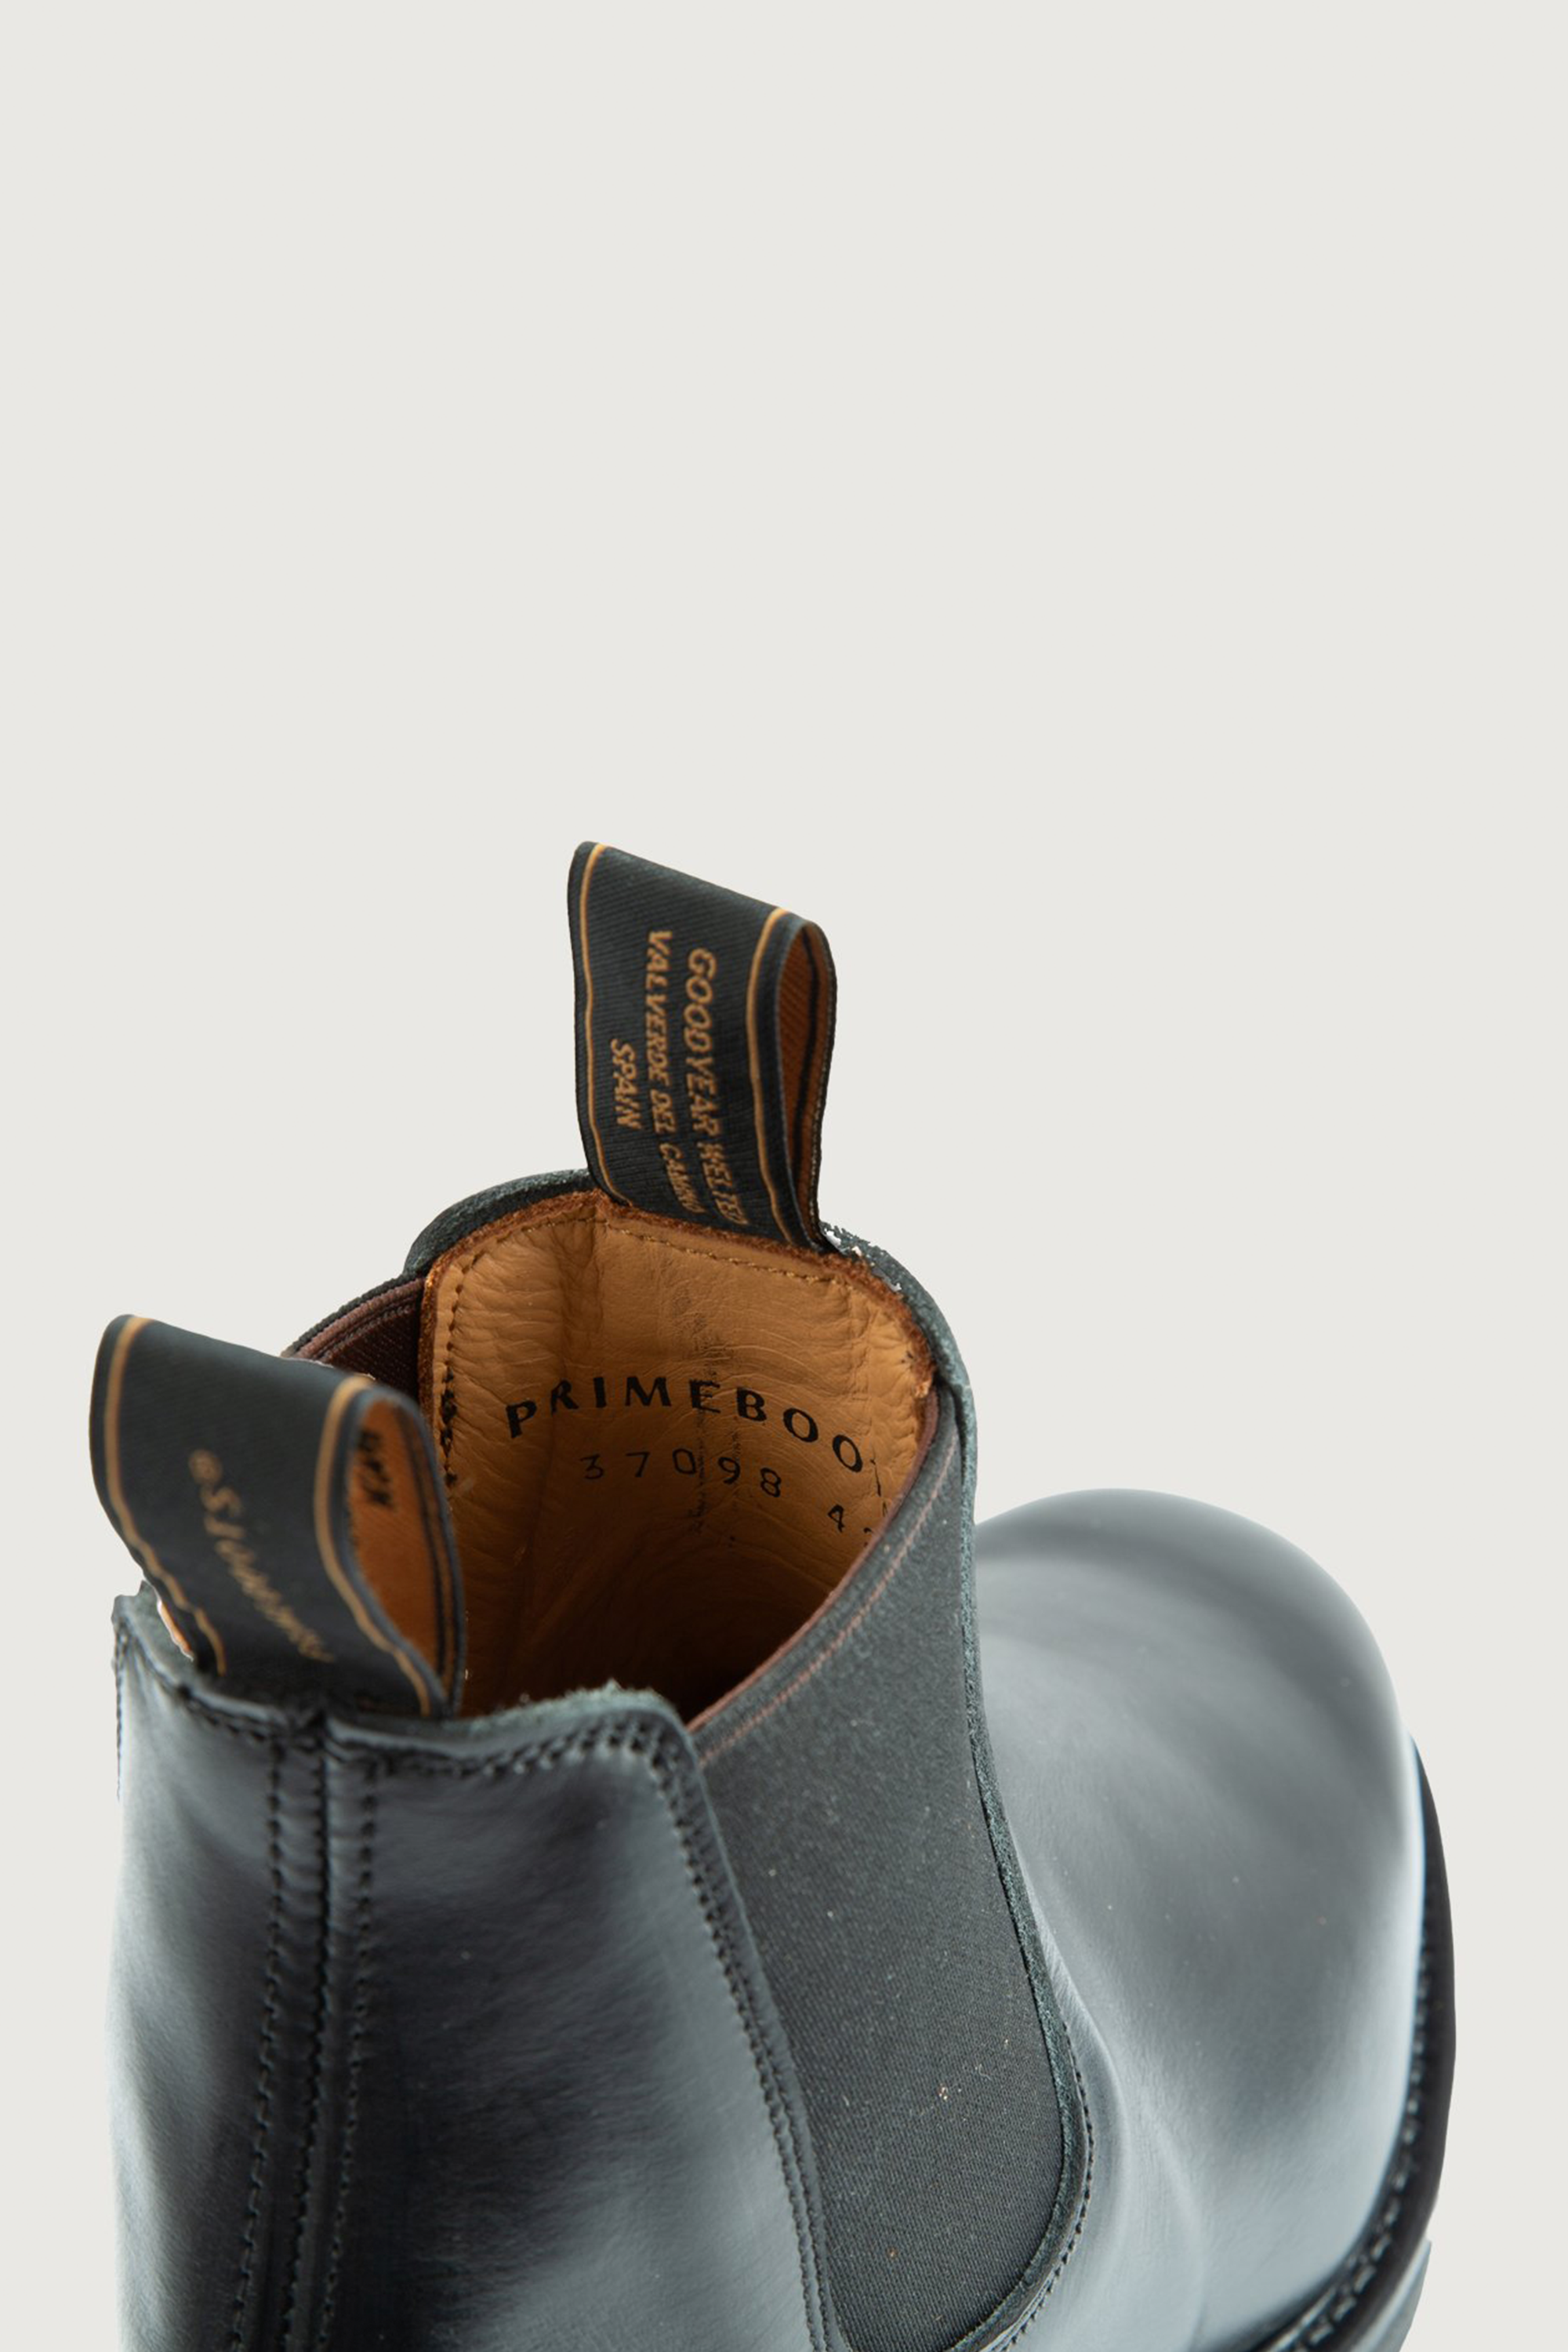 Primeboots - Classic chelsea boot